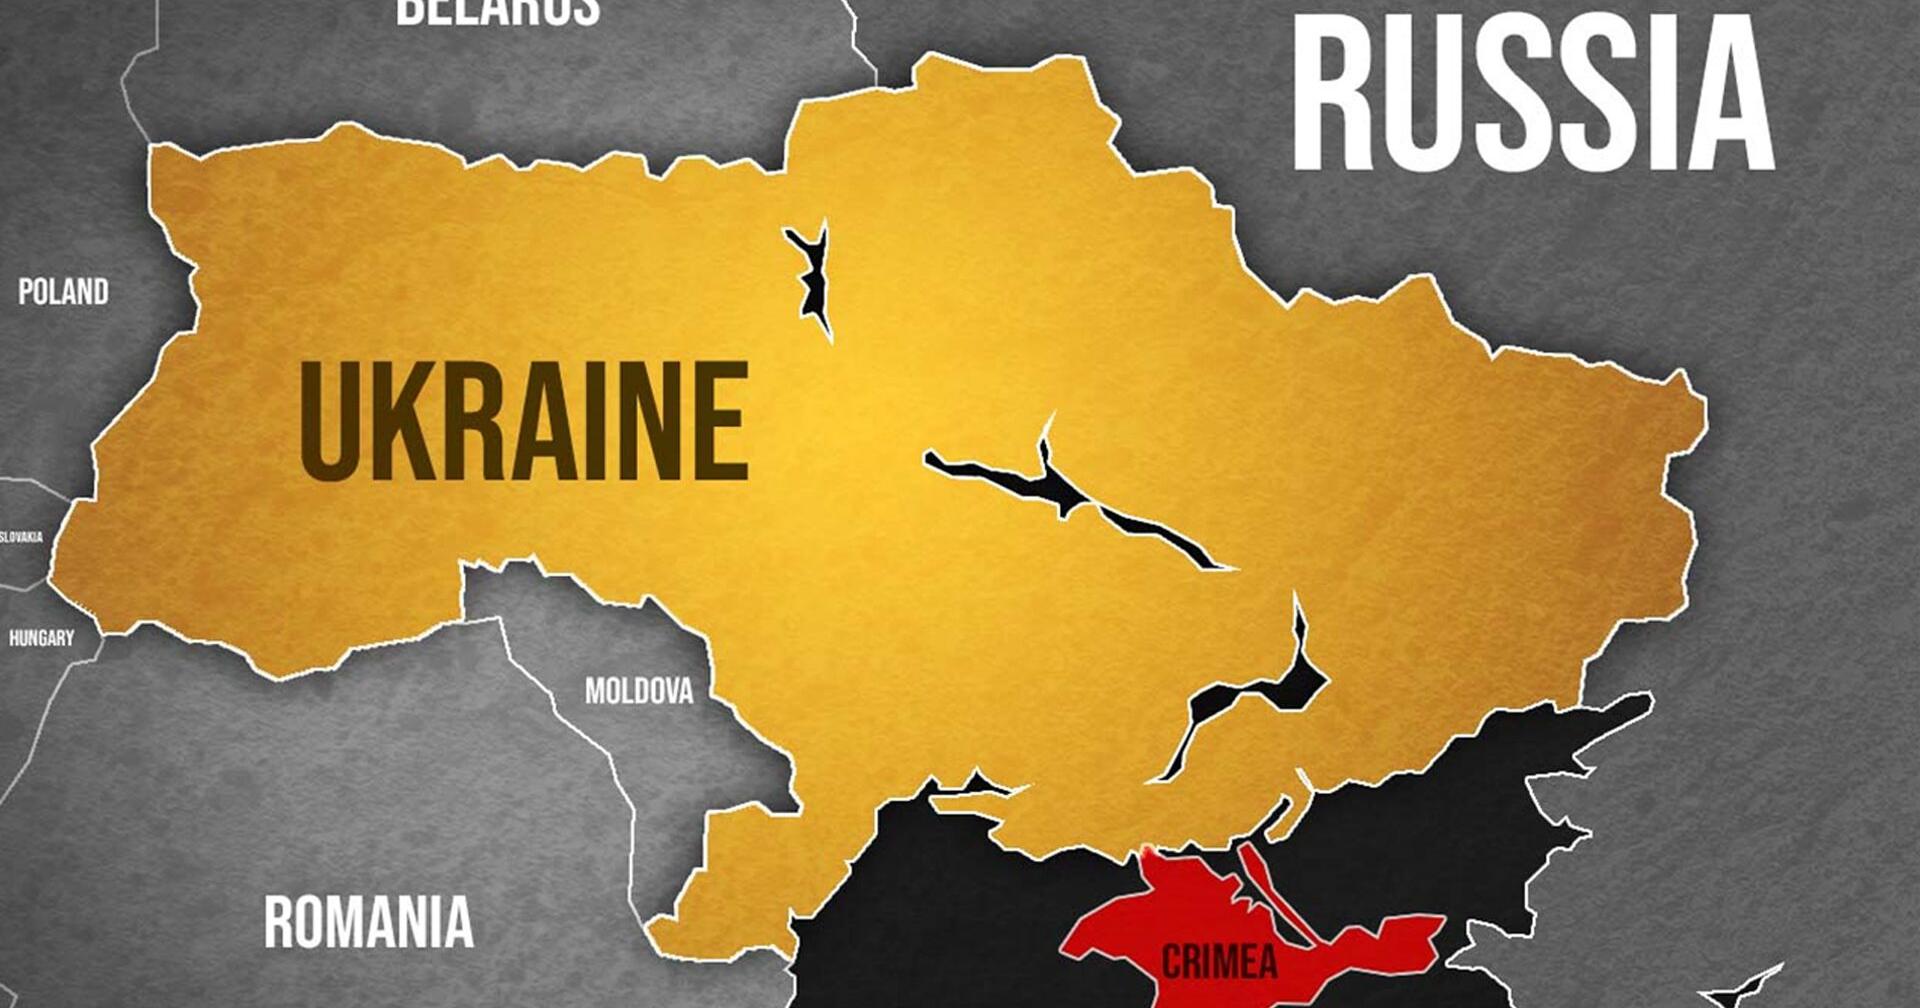 Nevadan With Ties To Russia & Ukraine Discusses Tense Situation